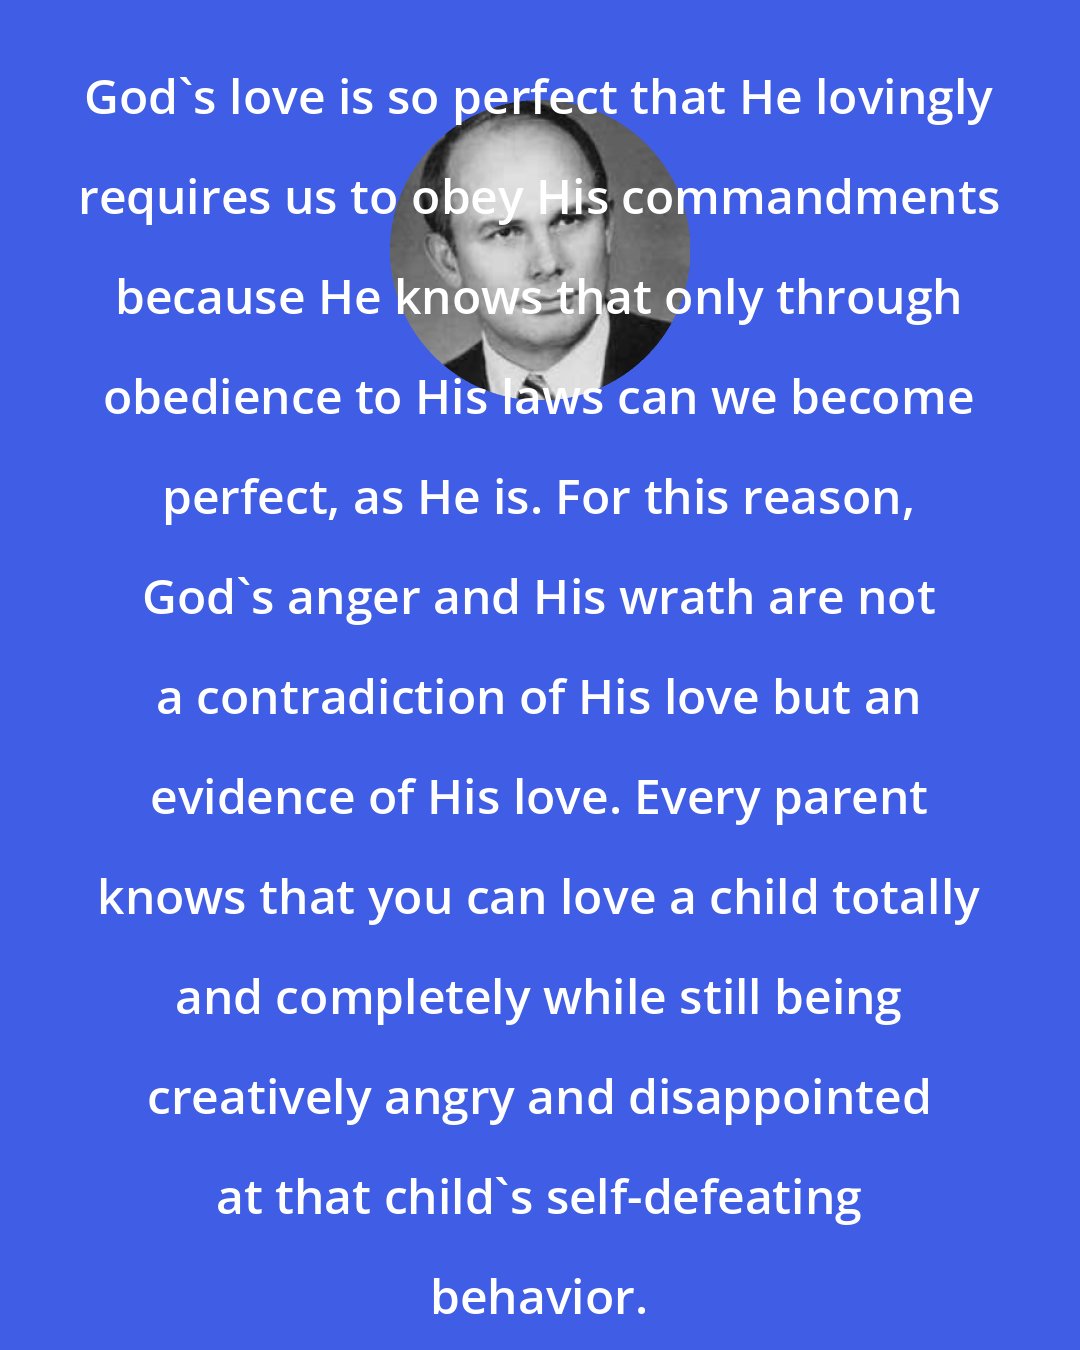 Dallin H. Oaks: God's love is so perfect that He lovingly requires us to obey His commandments because He knows that only through obedience to His laws can we become perfect, as He is. For this reason, God's anger and His wrath are not a contradiction of His love but an evidence of His love. Every parent knows that you can love a child totally and completely while still being creatively angry and disappointed at that child's self-defeating behavior.